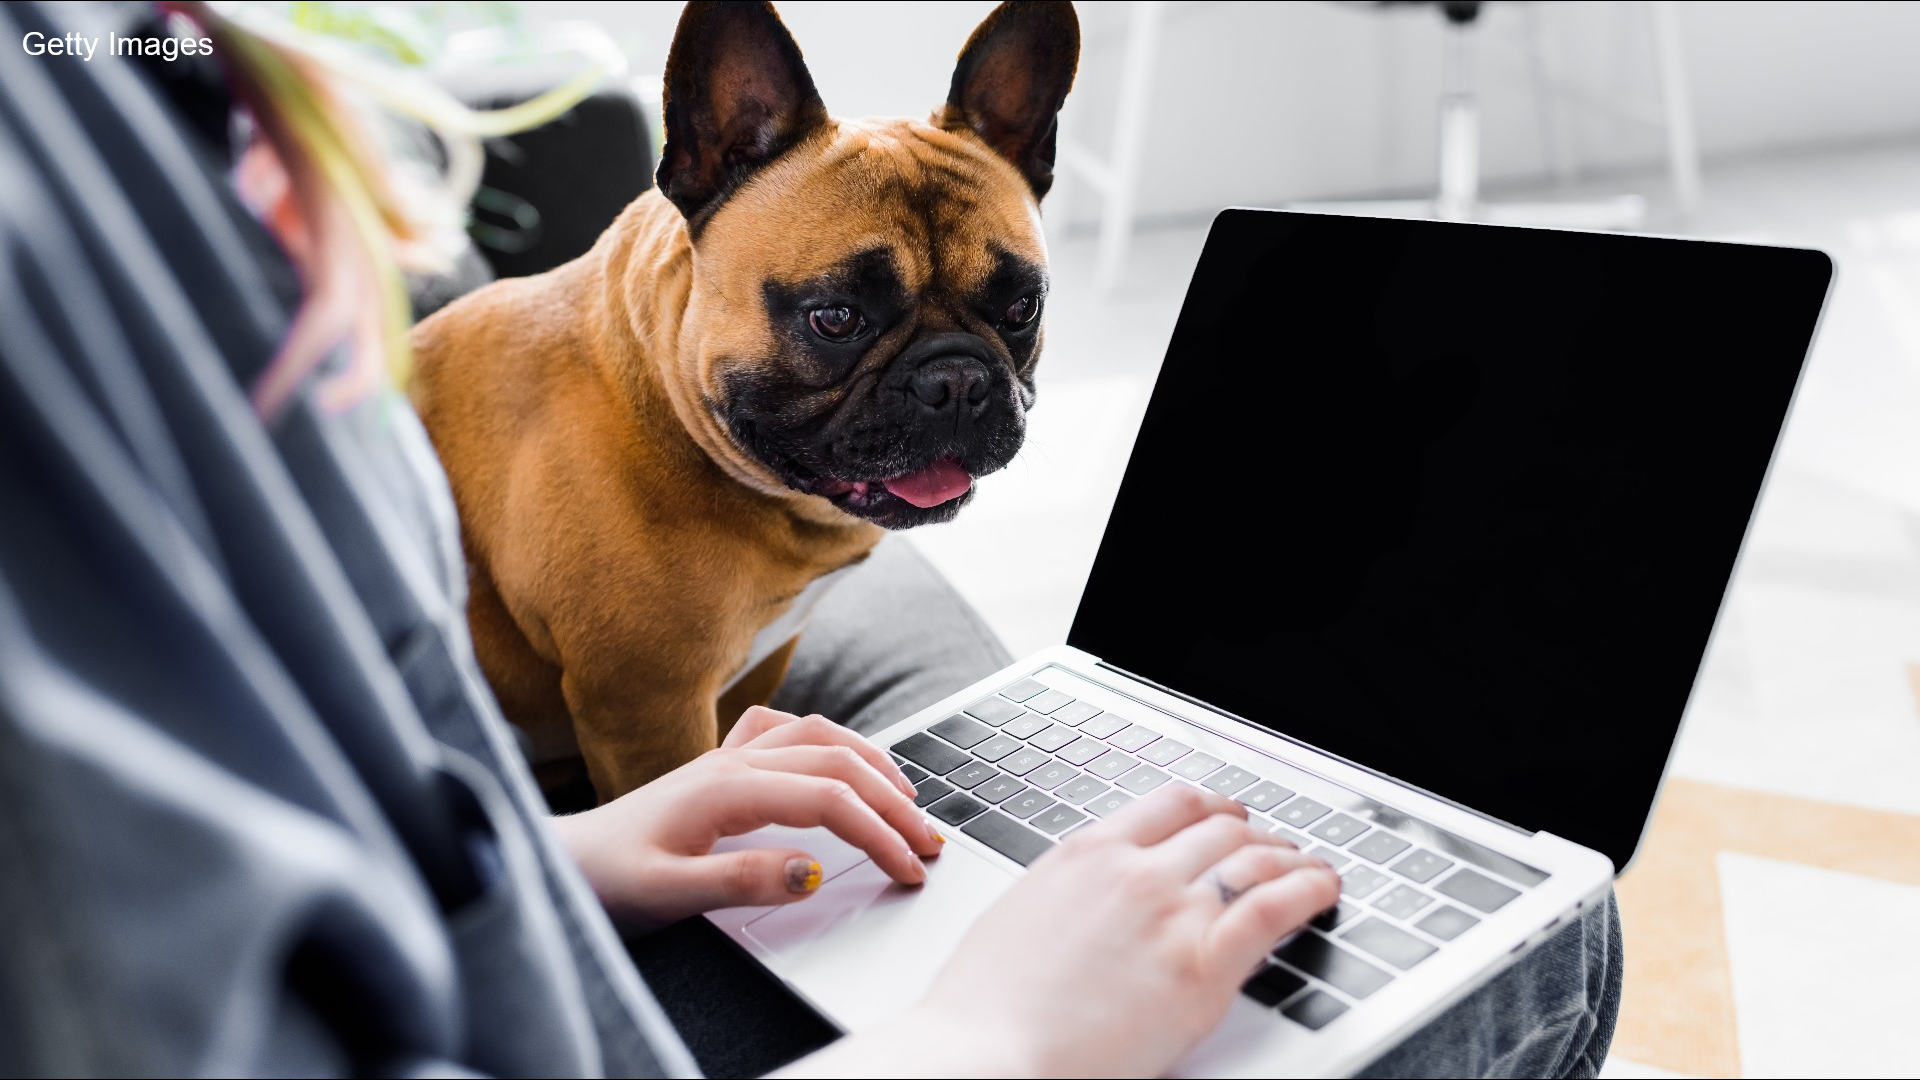 Guess who needs help adjusting to your new work from home life ... your pets!